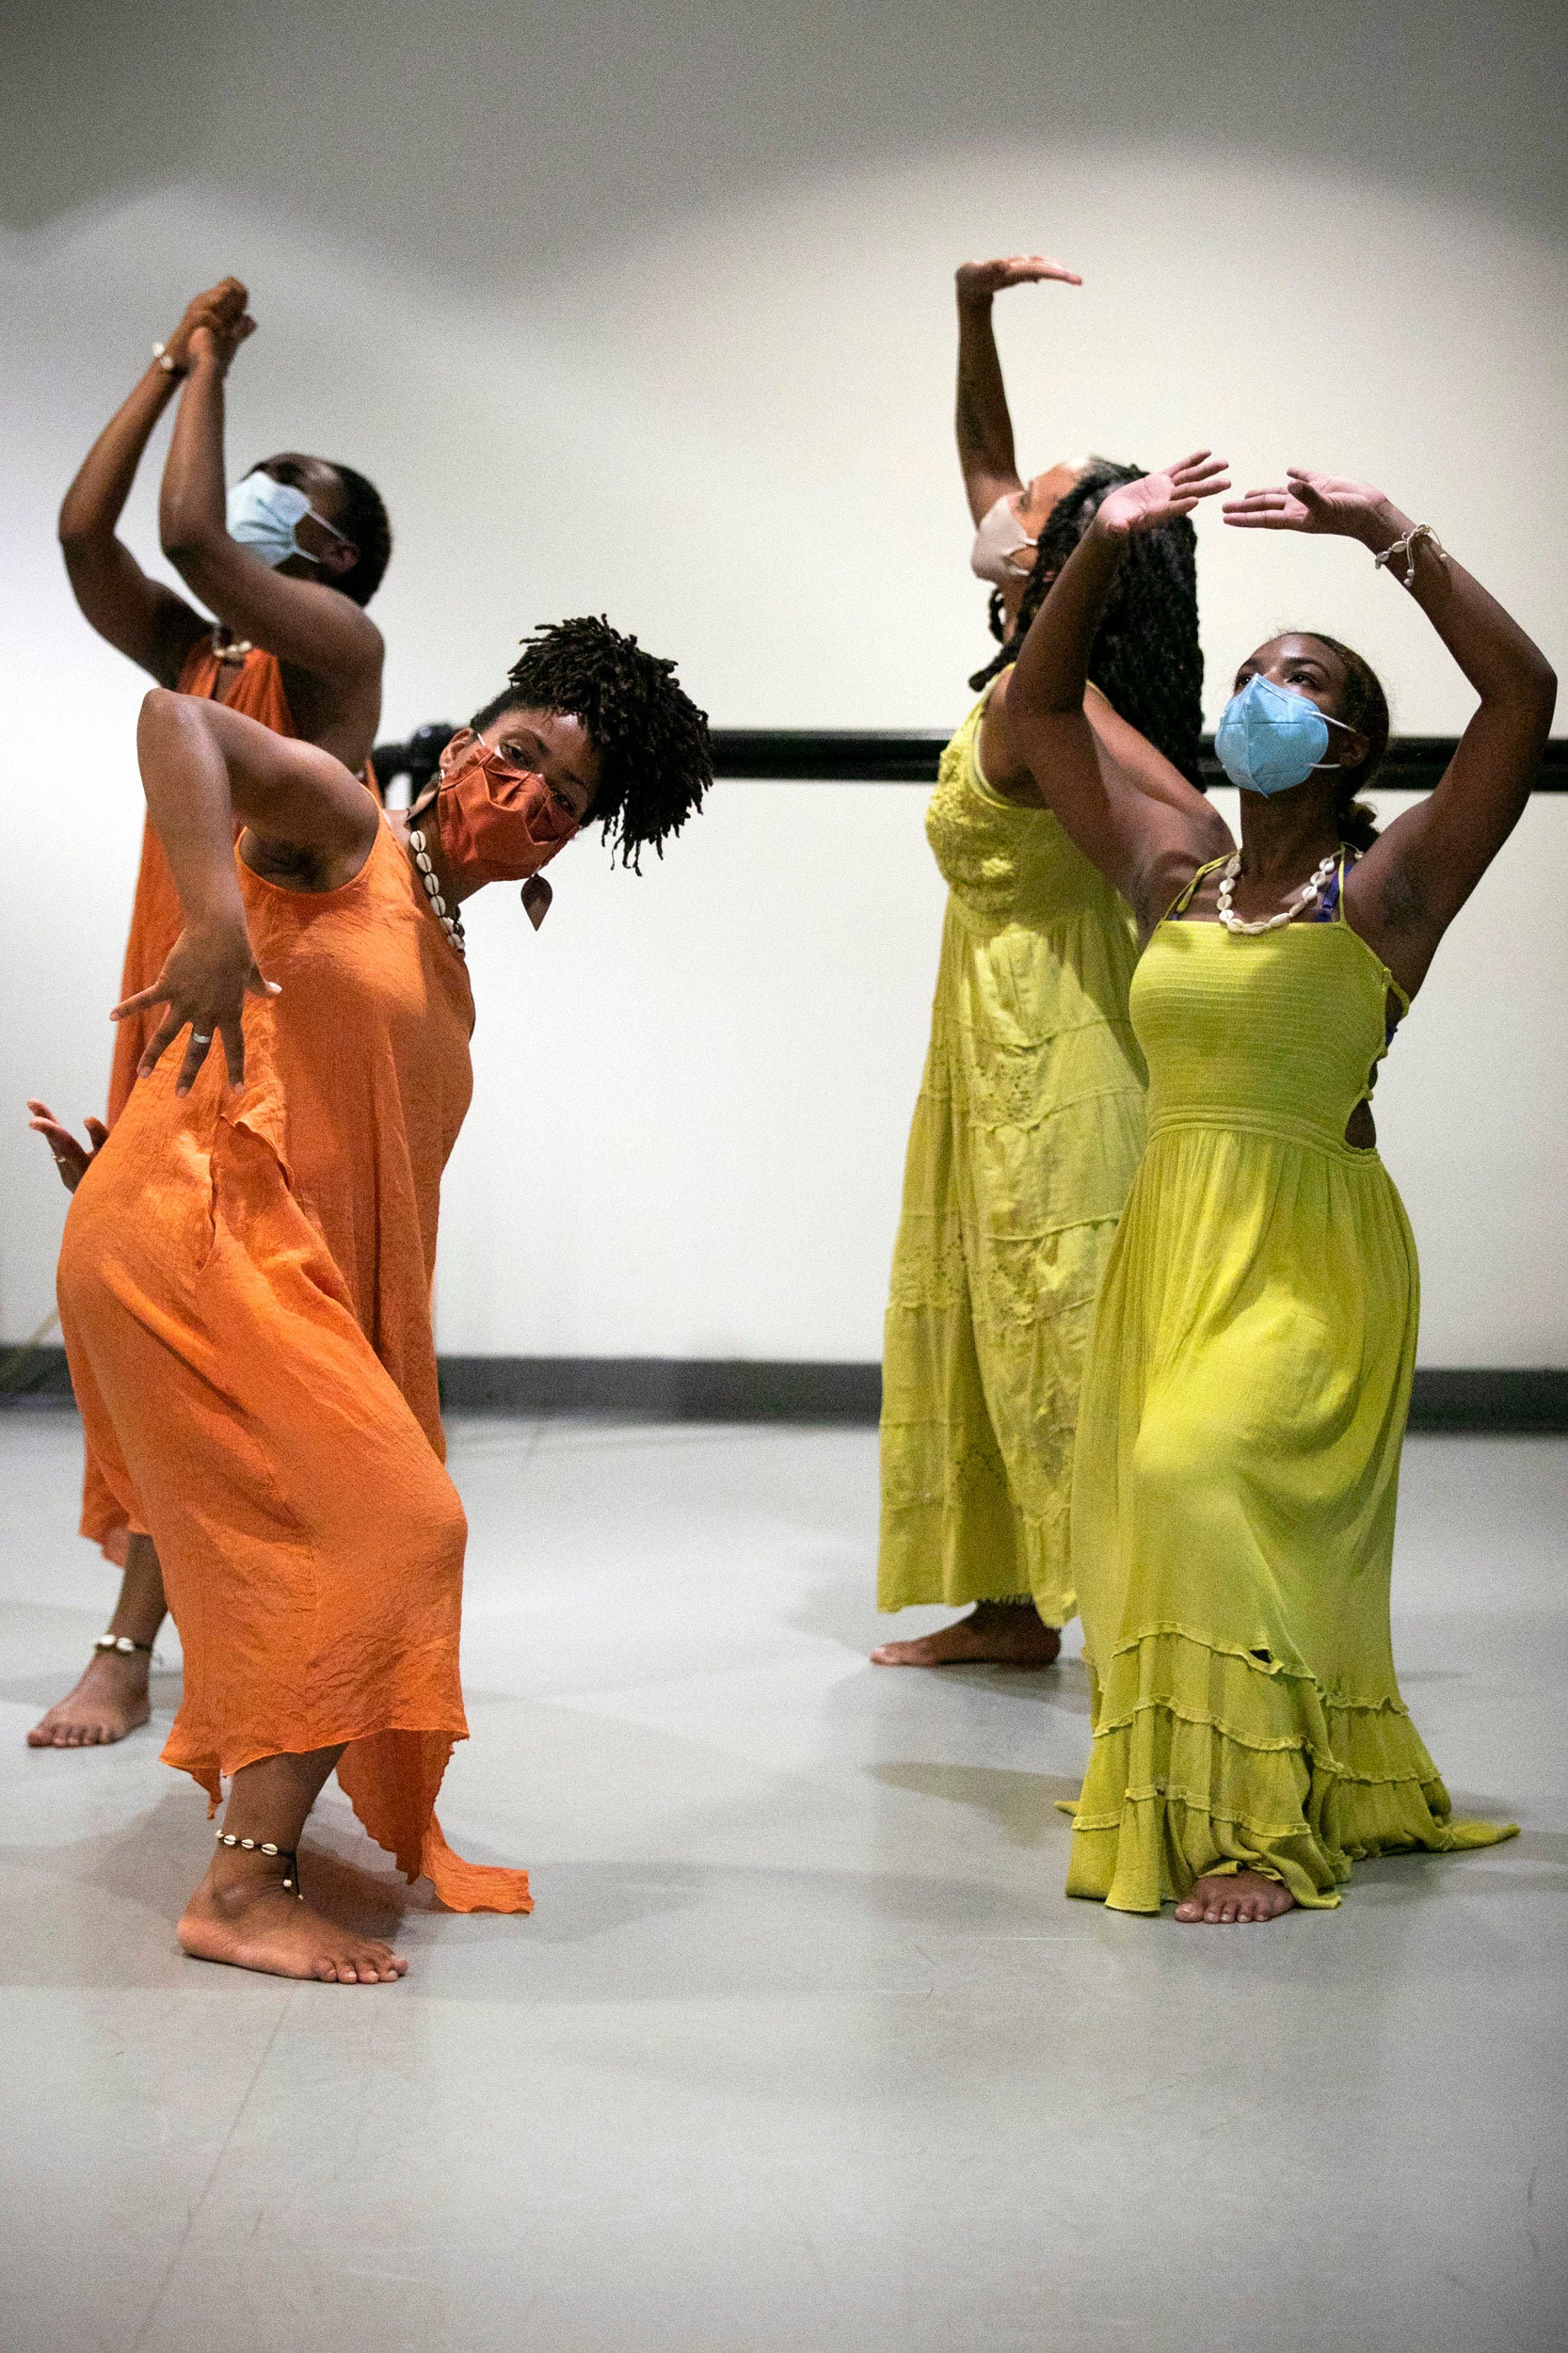 Dancers Patricka James (from left), Jenny Oliver, Toni Singleton, and Imani Deal are pictured during rehearsal.